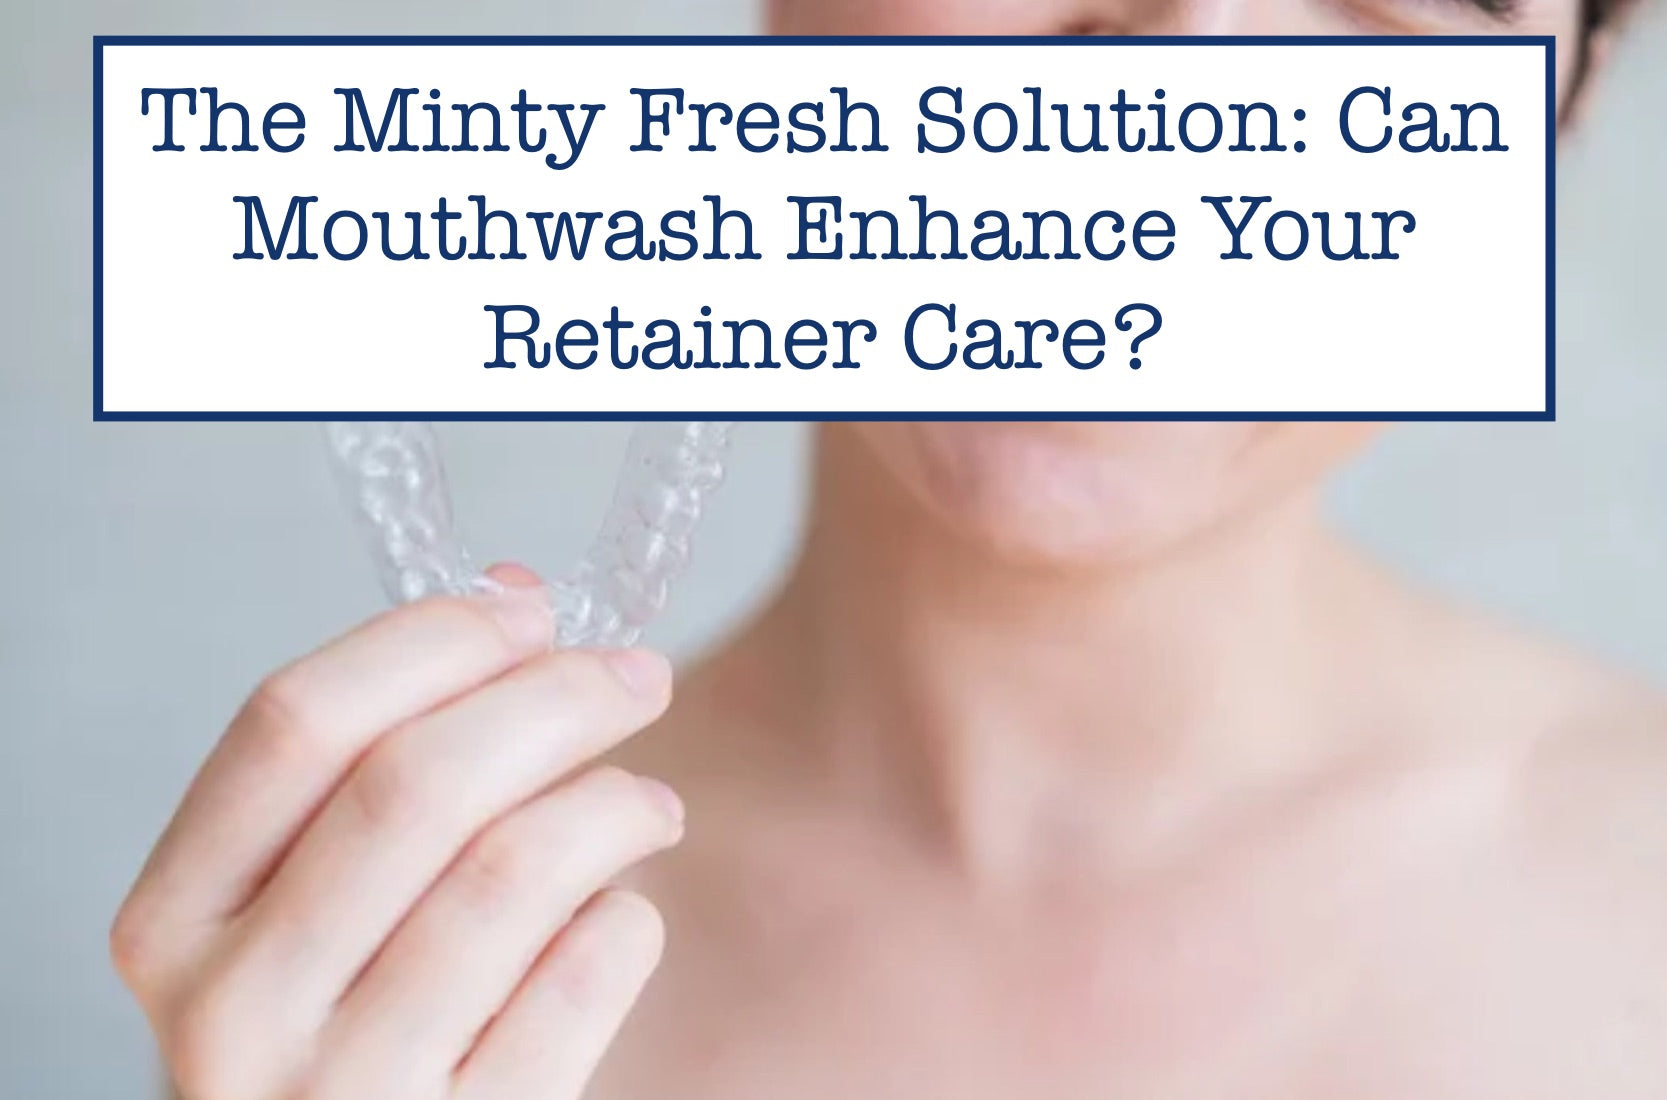 The Minty Fresh Solution: Can Mouthwash Enhance Your Retainer Care?